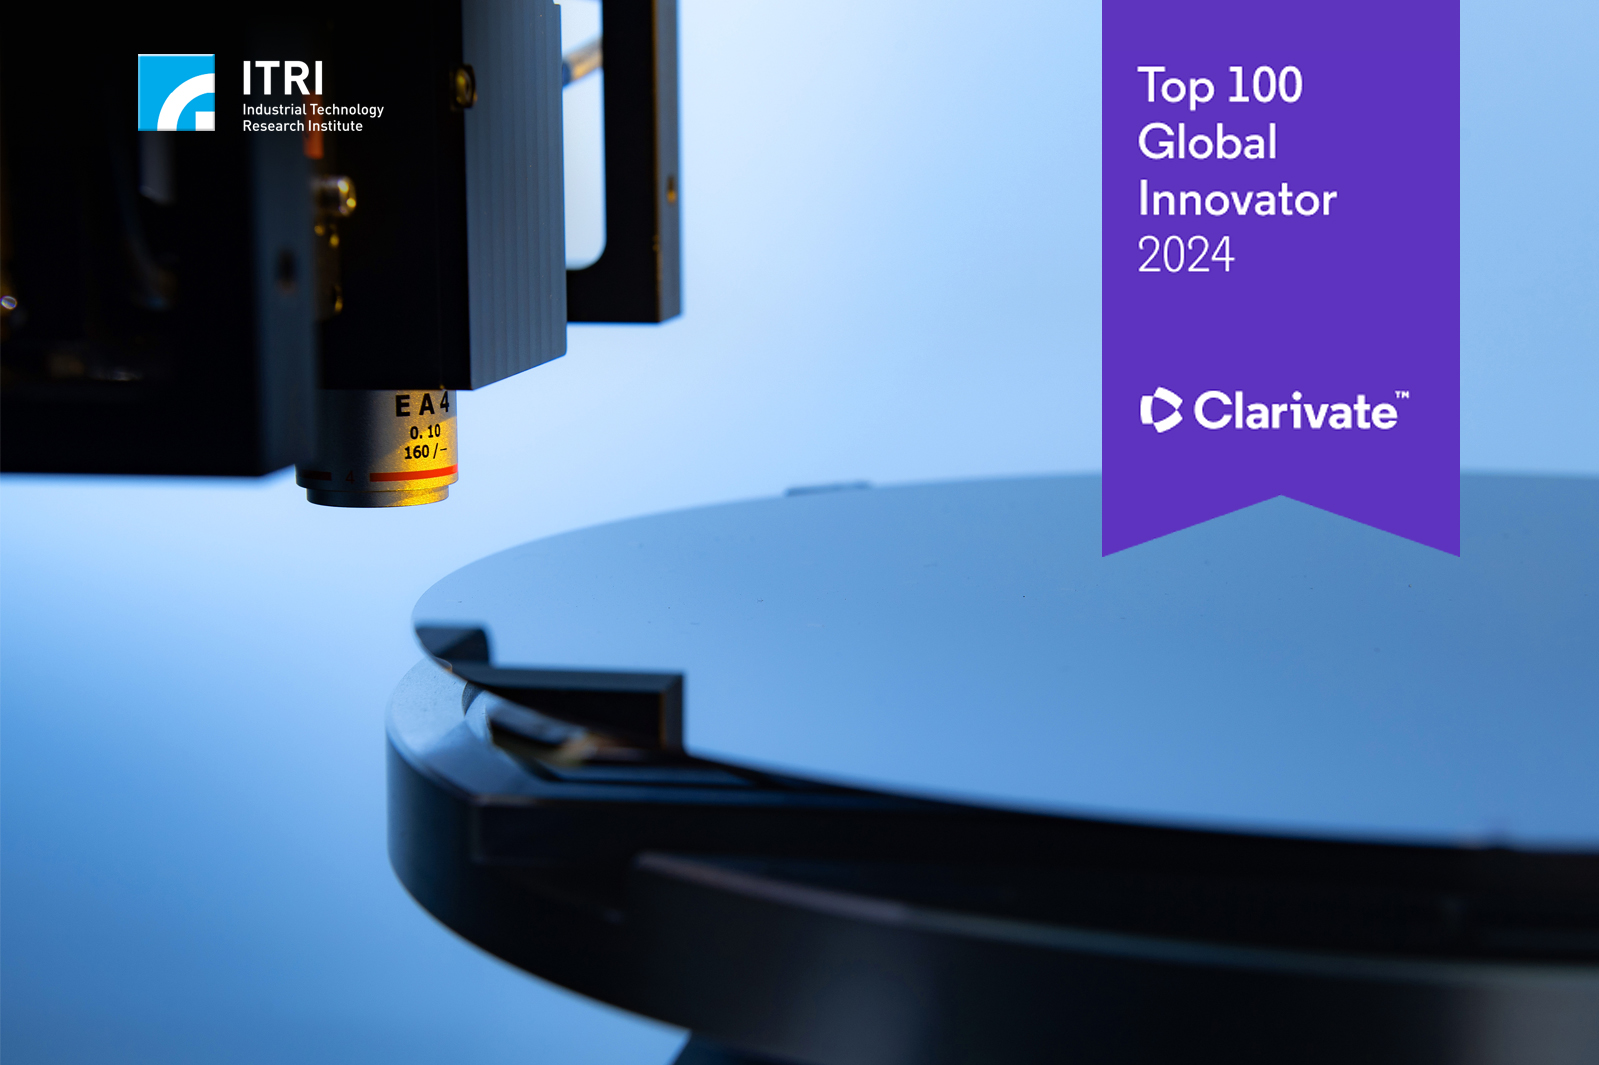 ITRI Recognized as a Clarivate Top 100 Global Innovator for the Eighth Time